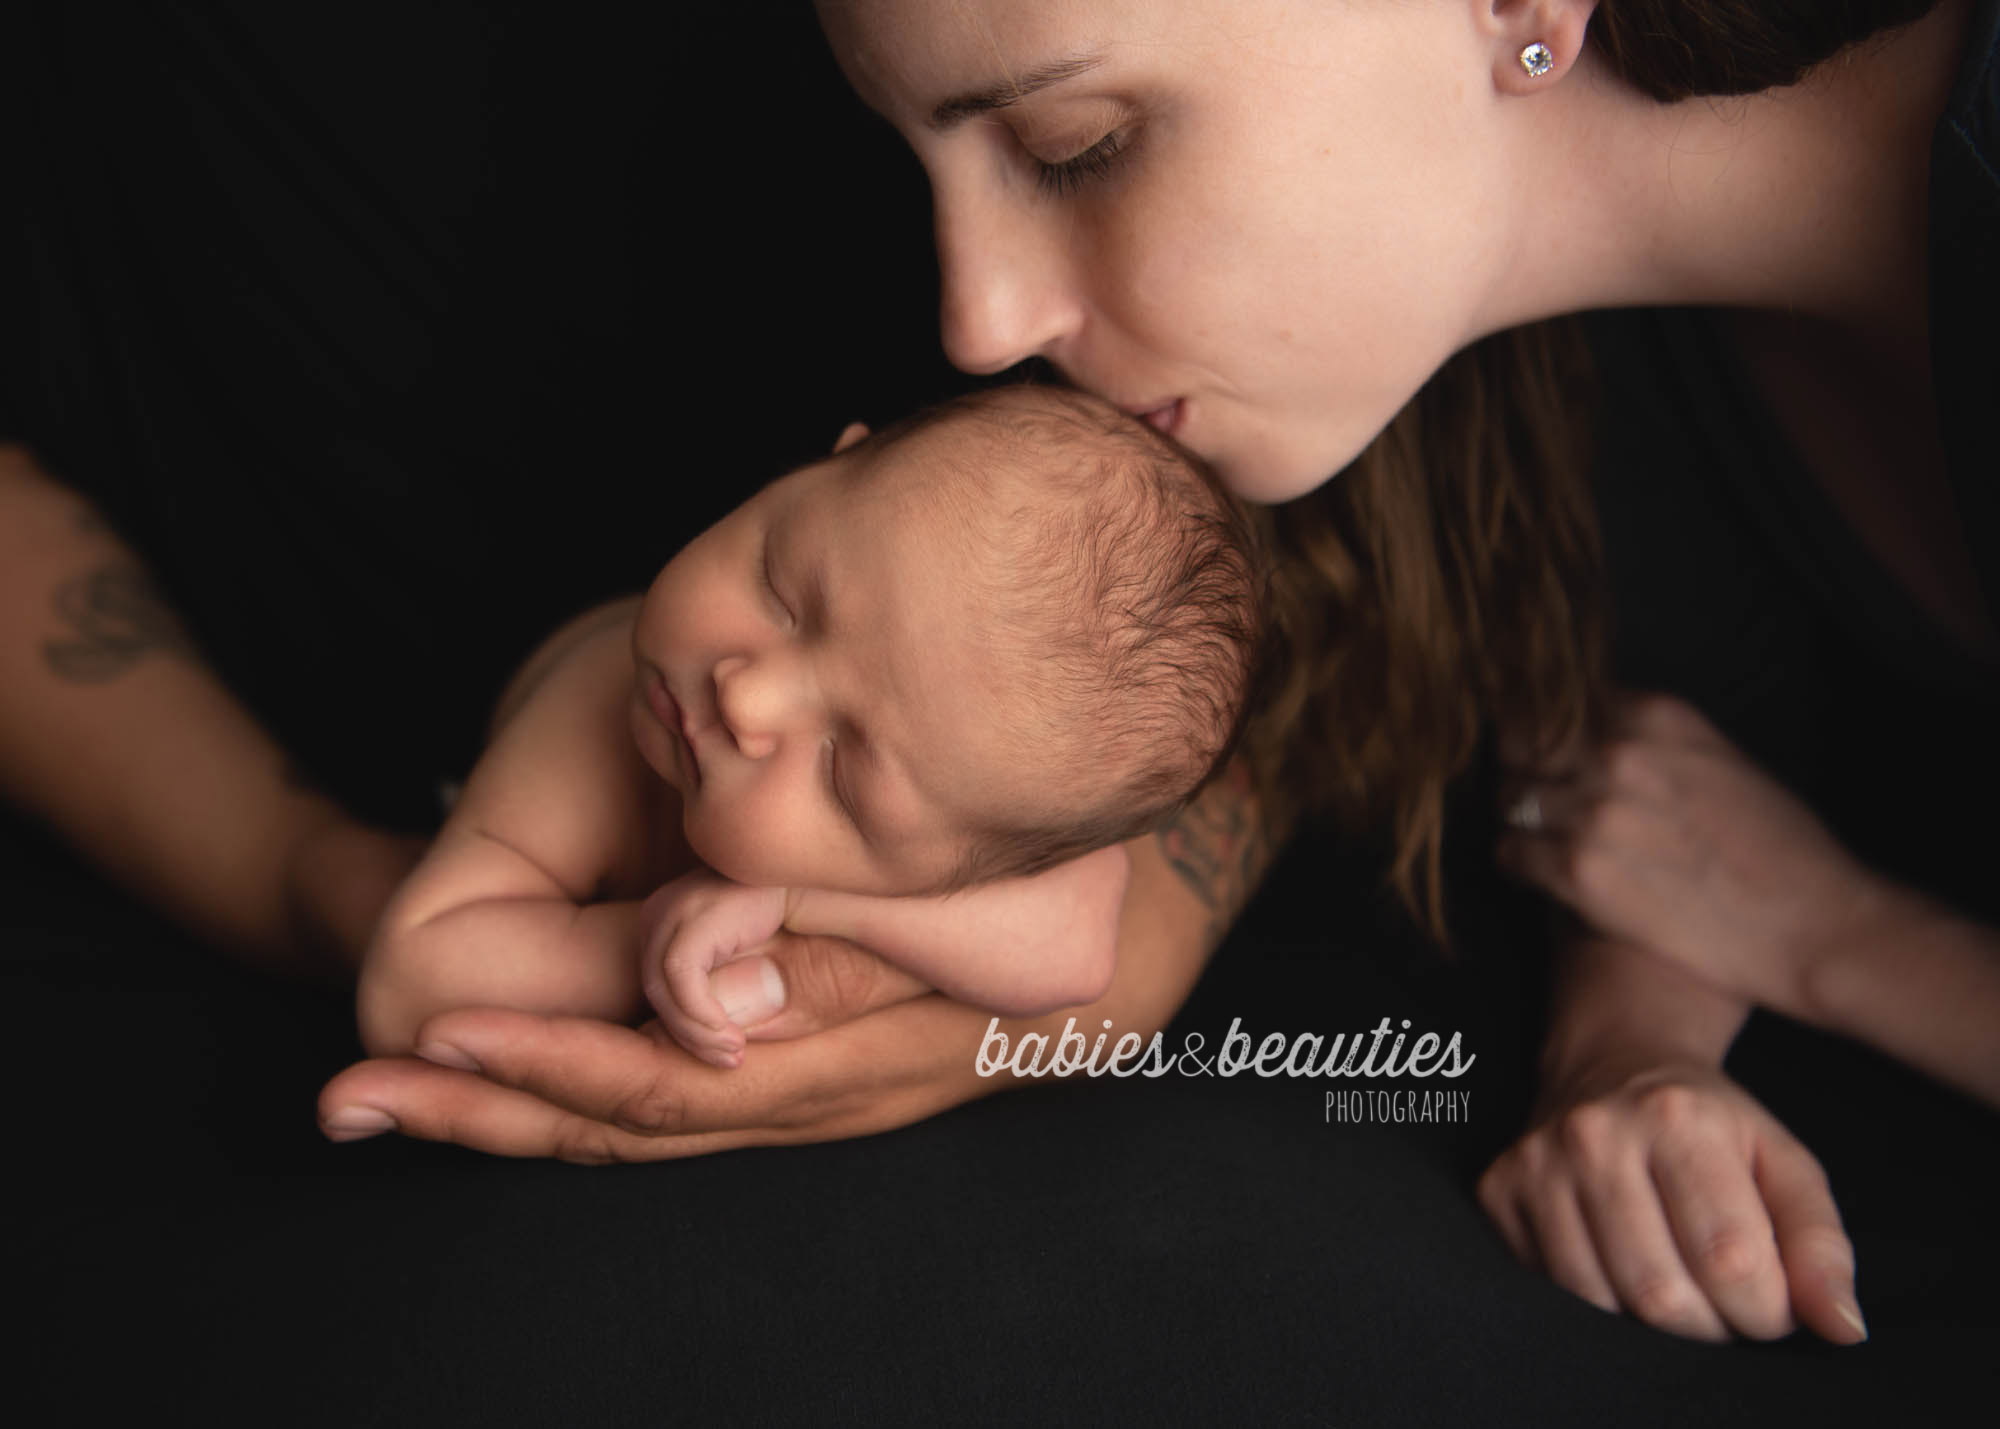 Mom kissing newborn baby's head while baby sleeps in dad's hands | newborn photography in san diego | Visit www.babiesandbeauties.com to learn more!